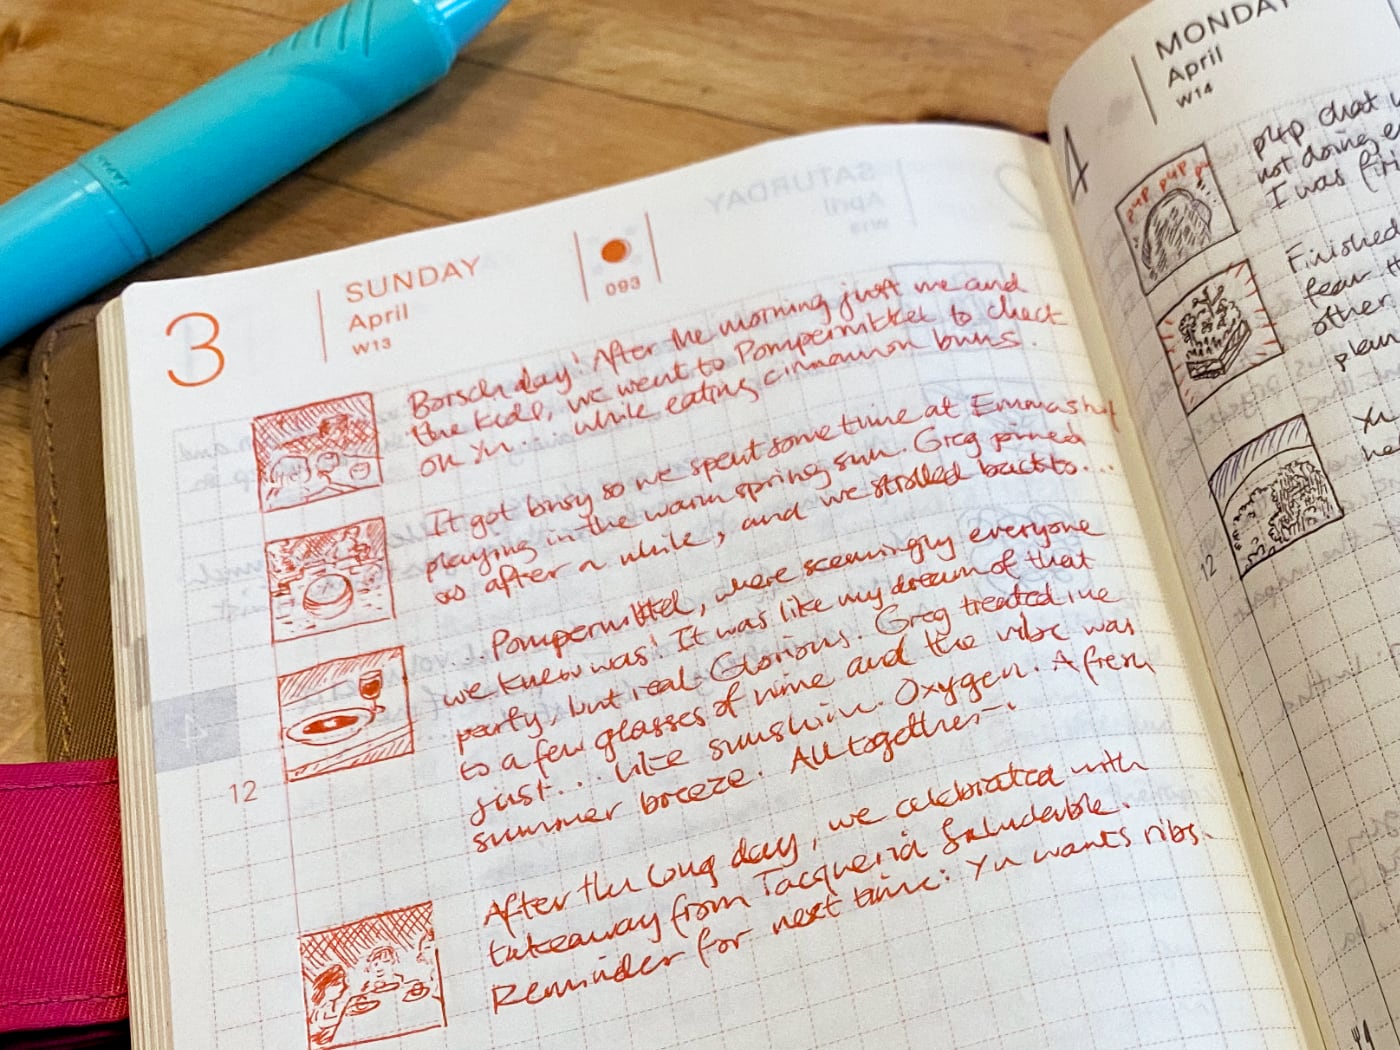 A photograph of my journal.